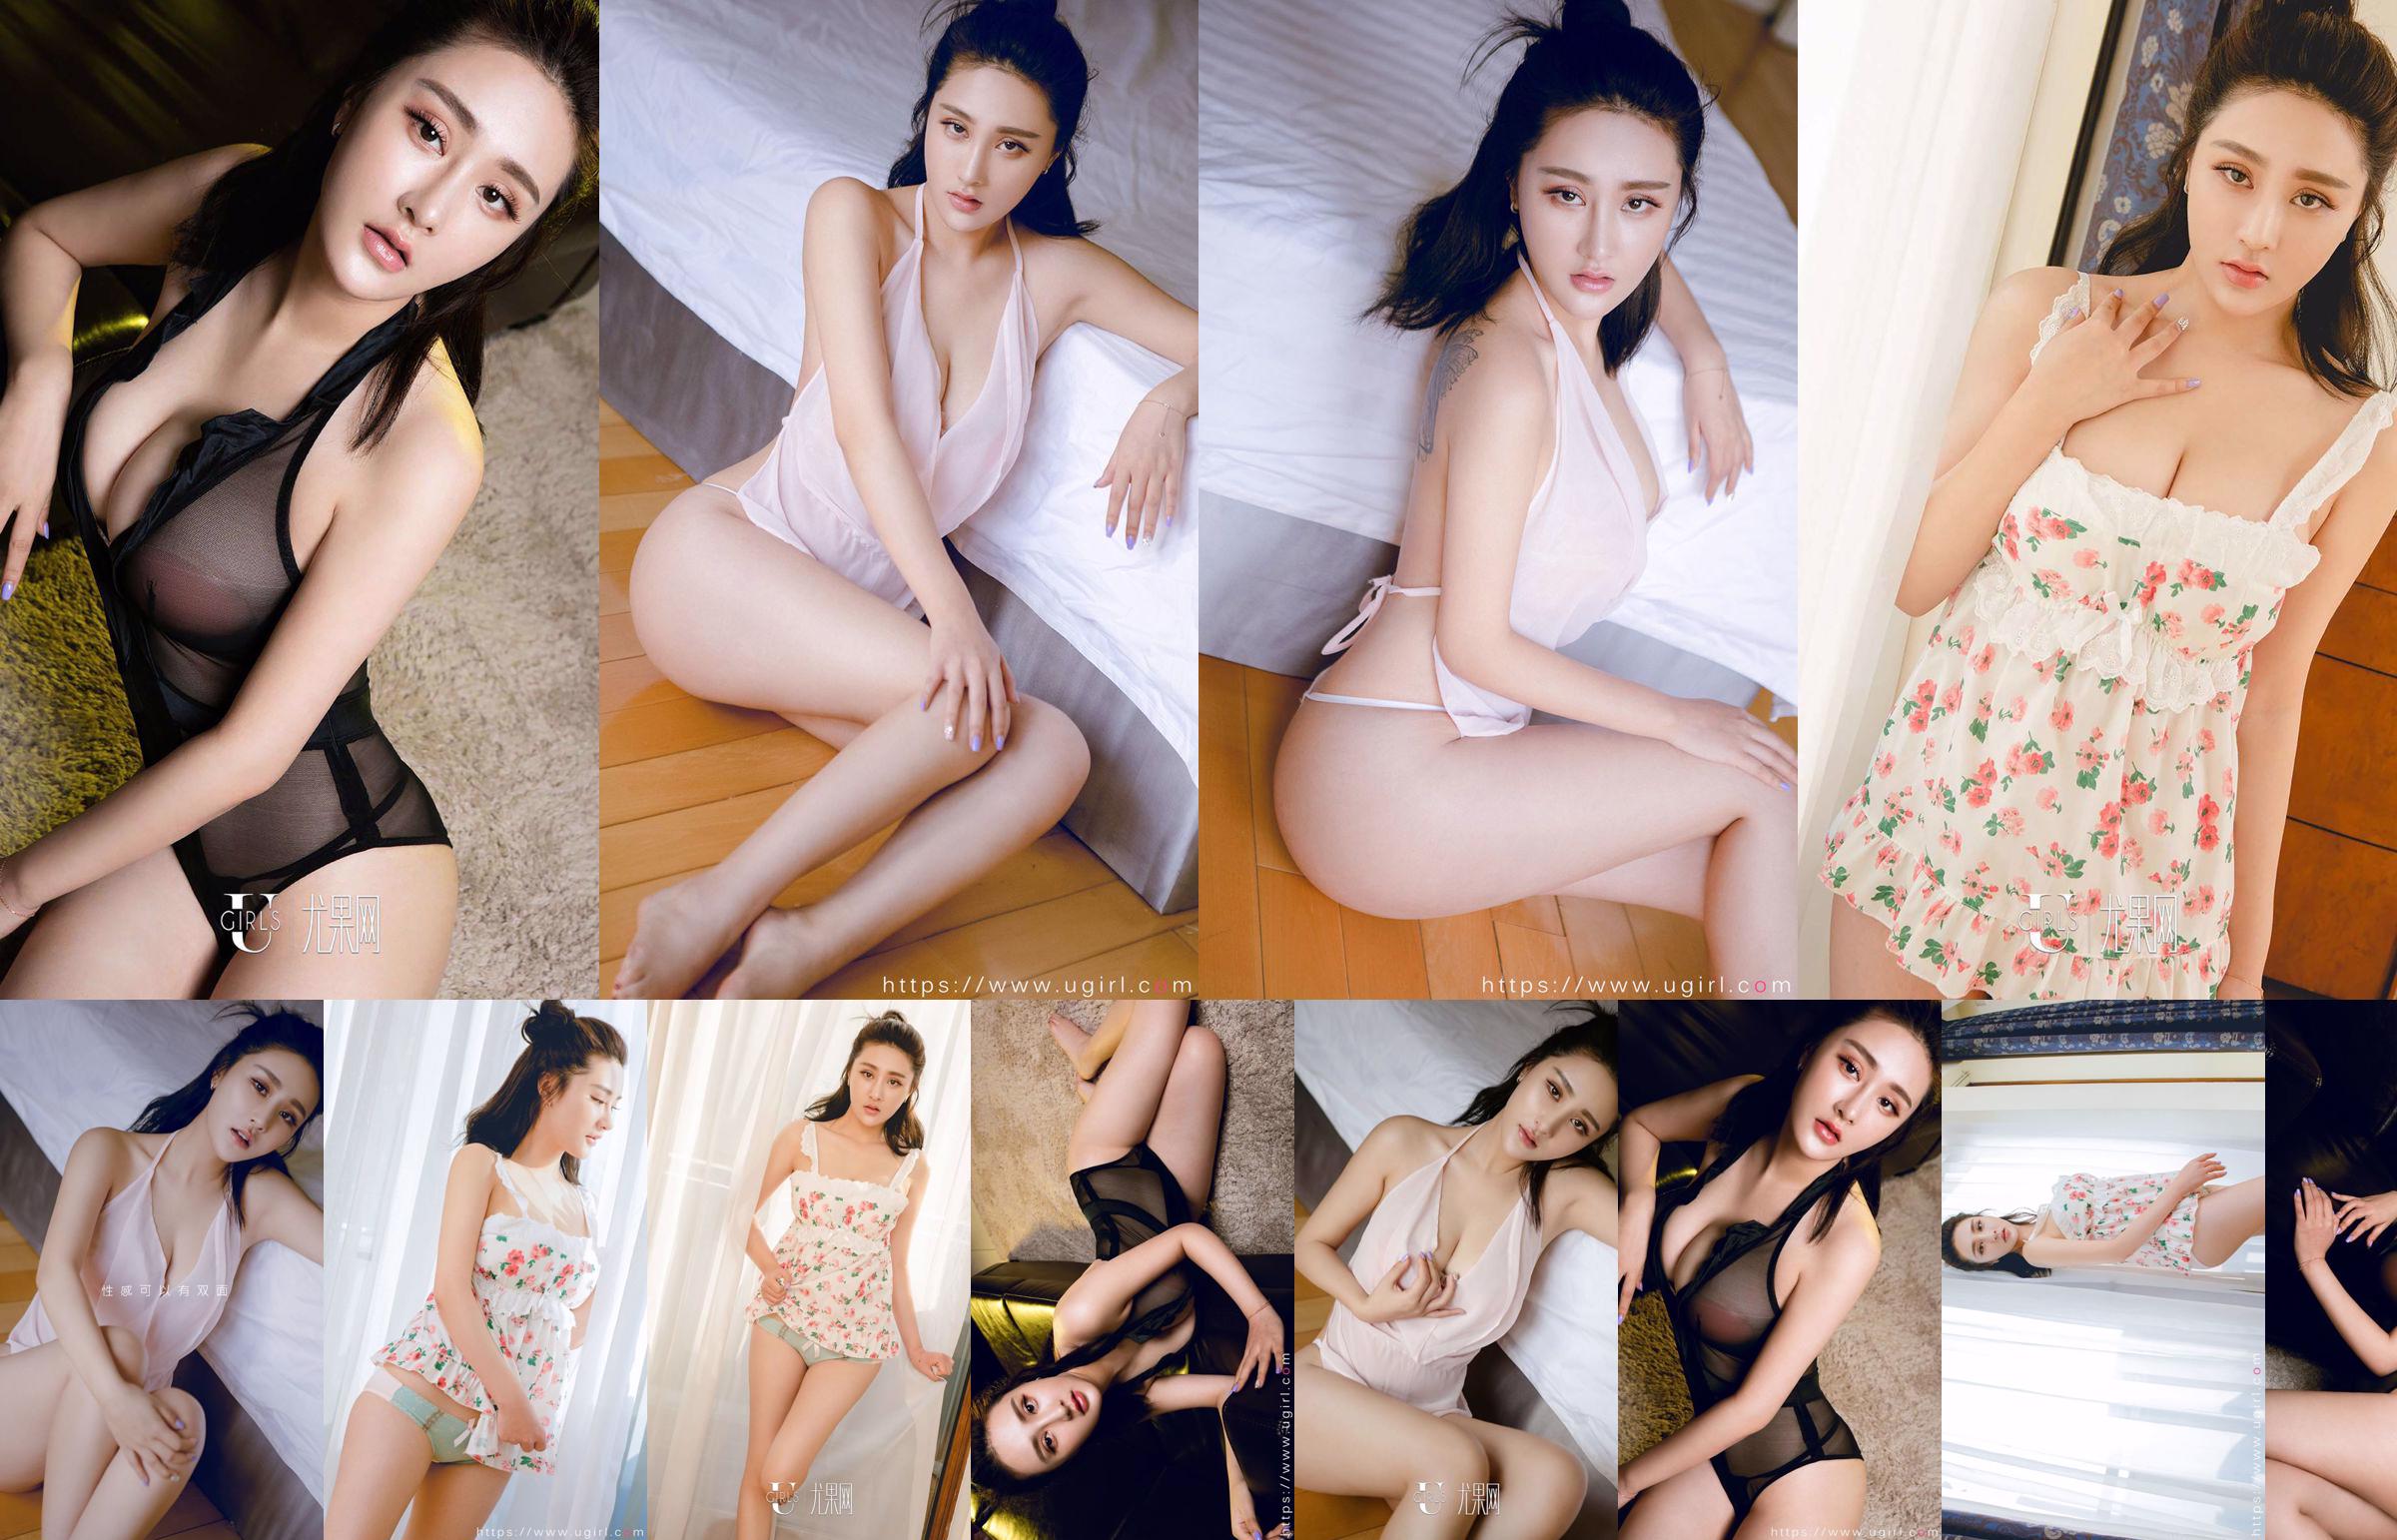 Zhang Xinmiao "It's All Angels' Trouble" [Love Youwu Ugirls] No.534 No.760bd0 Page 6